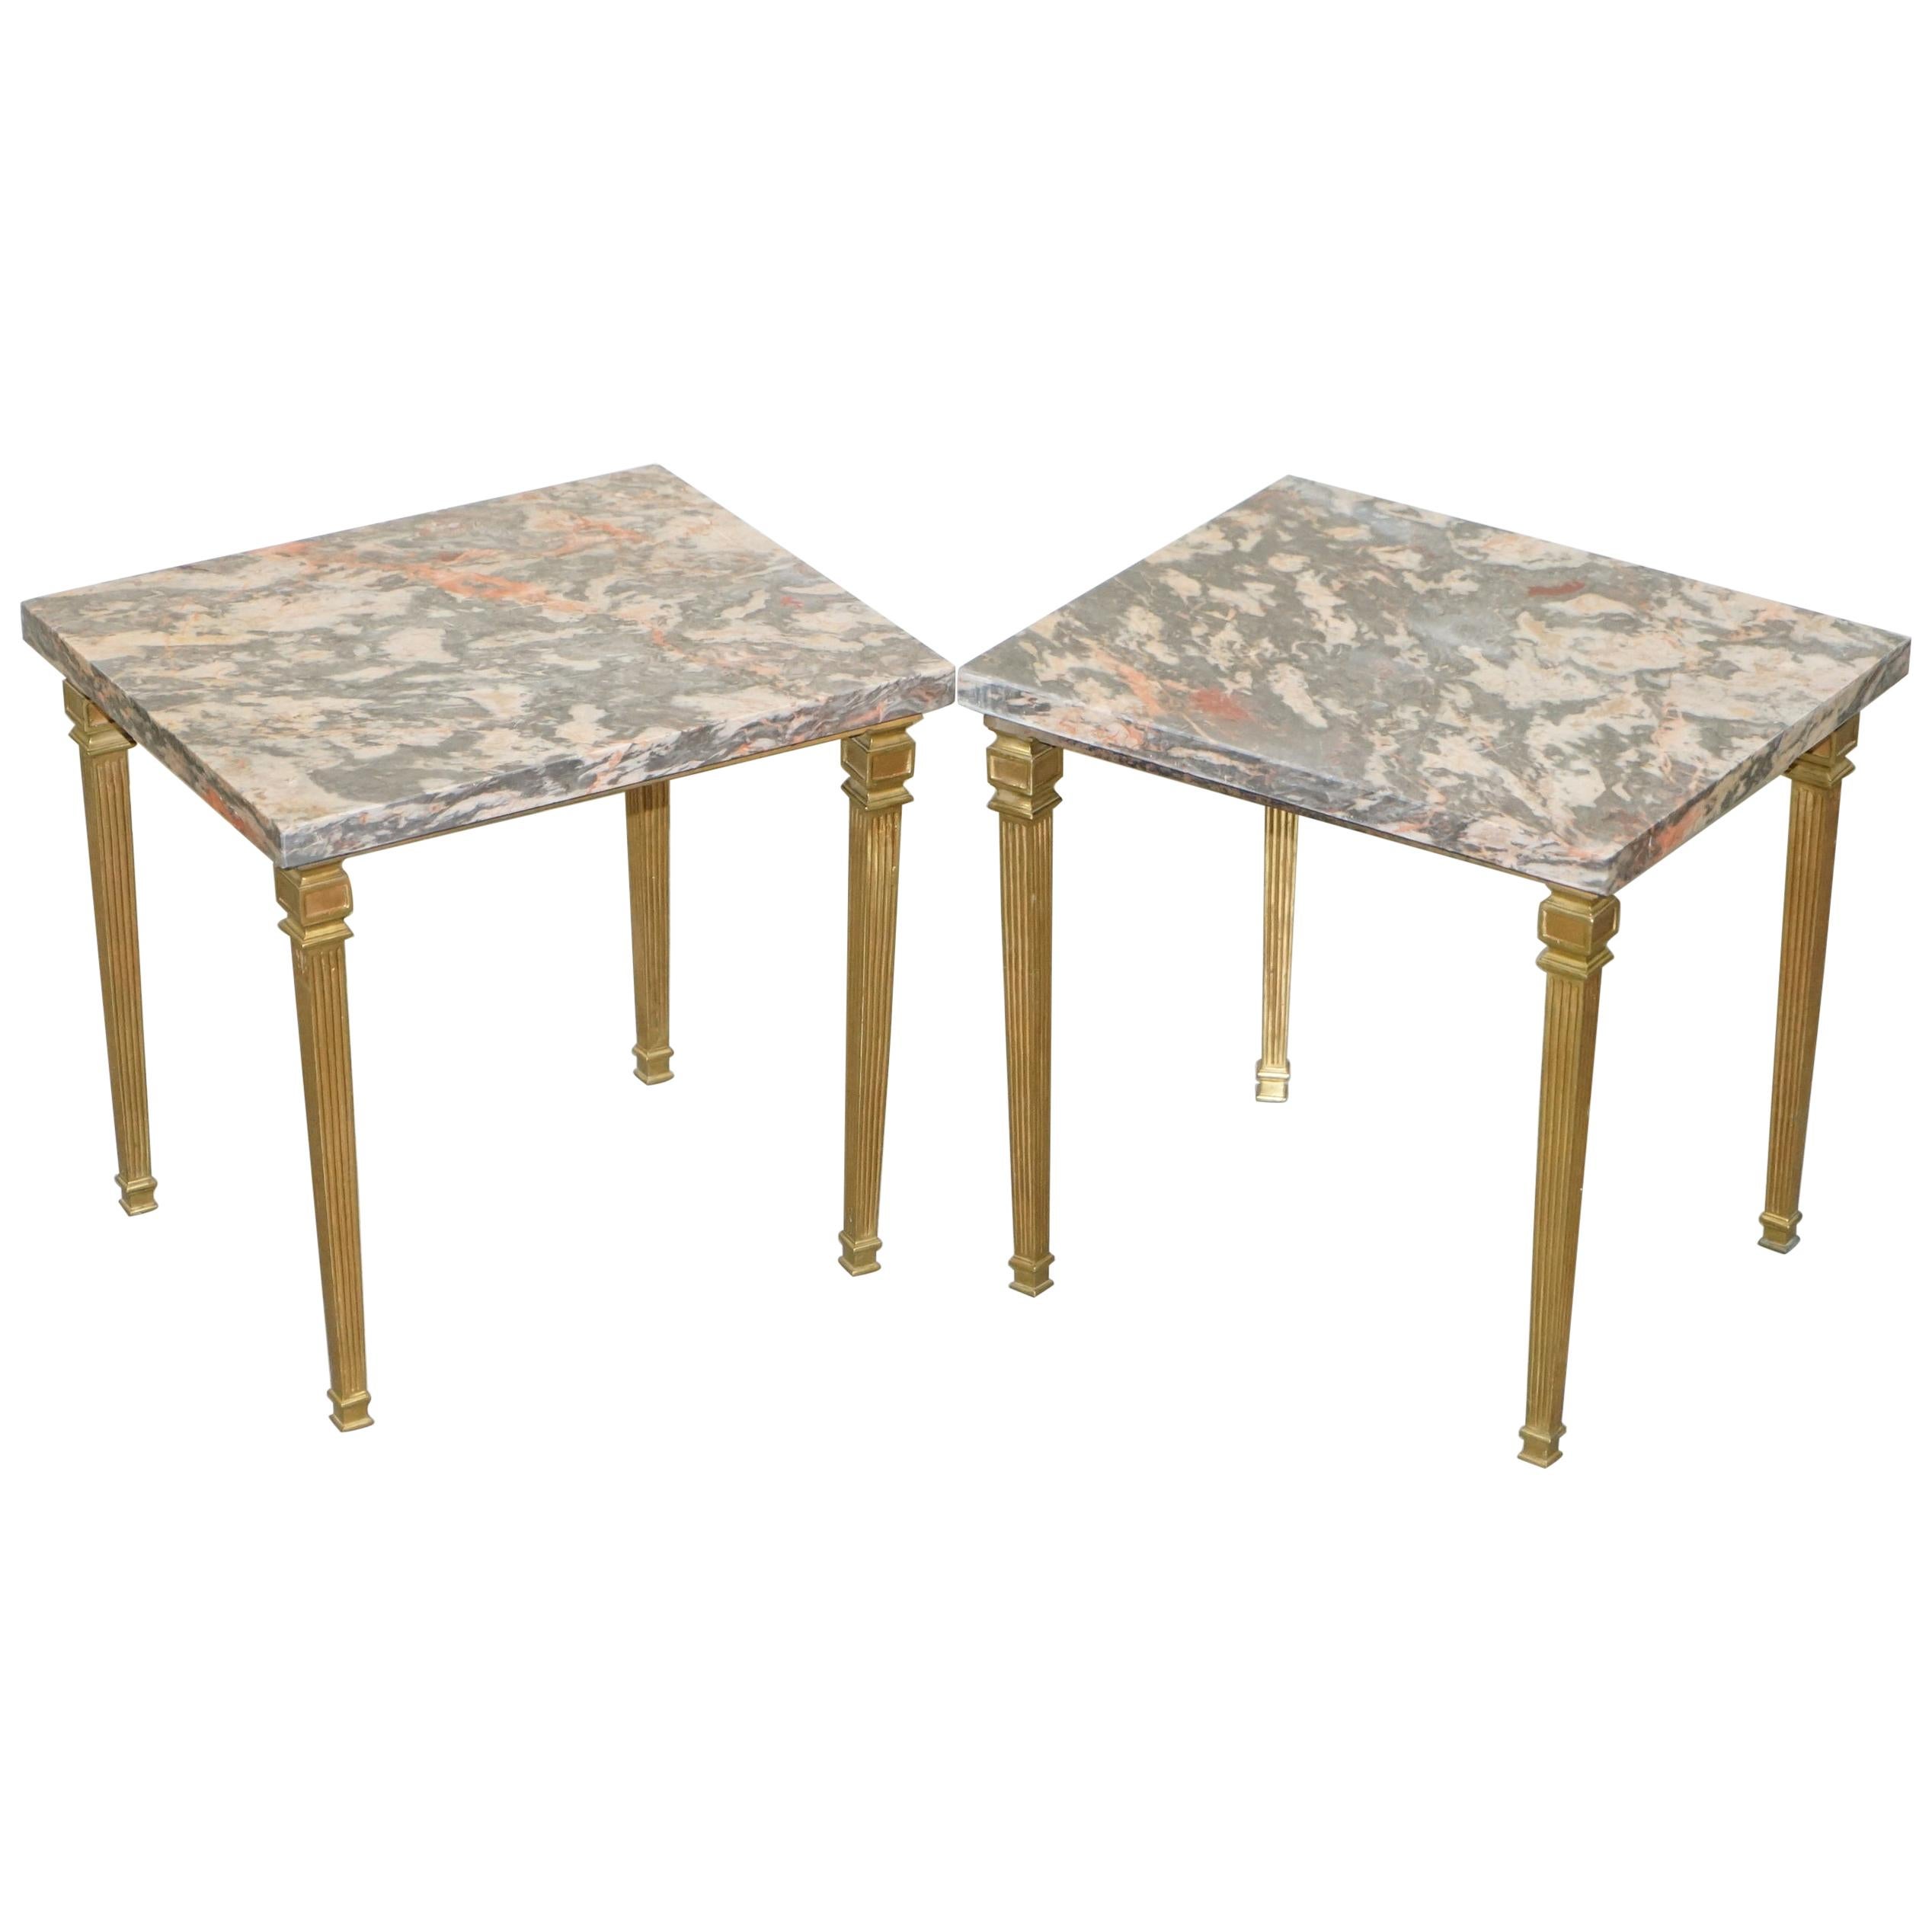 Lovely Pair of Gold Gilt Bronze Side Tables with Thick Heavy Purple Marble Tops